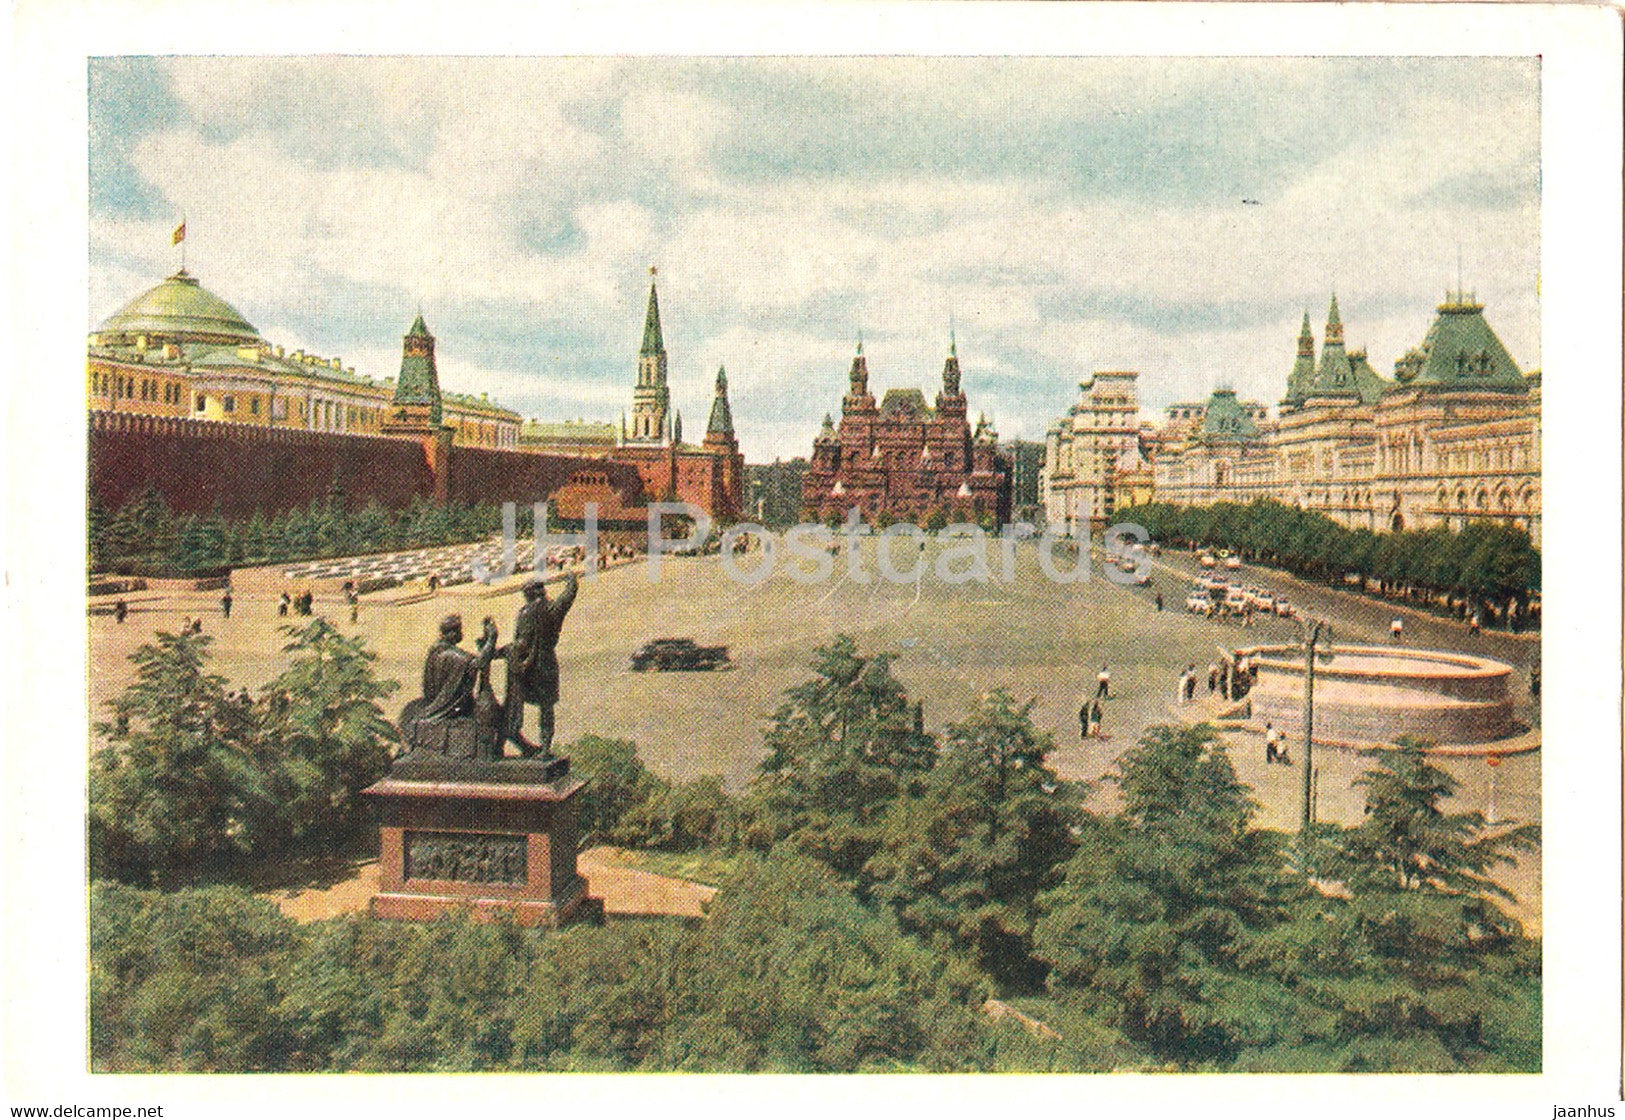 Moscow - Red Square - postal stationery - 1959 - Russia USSR - unused - JH Postcards